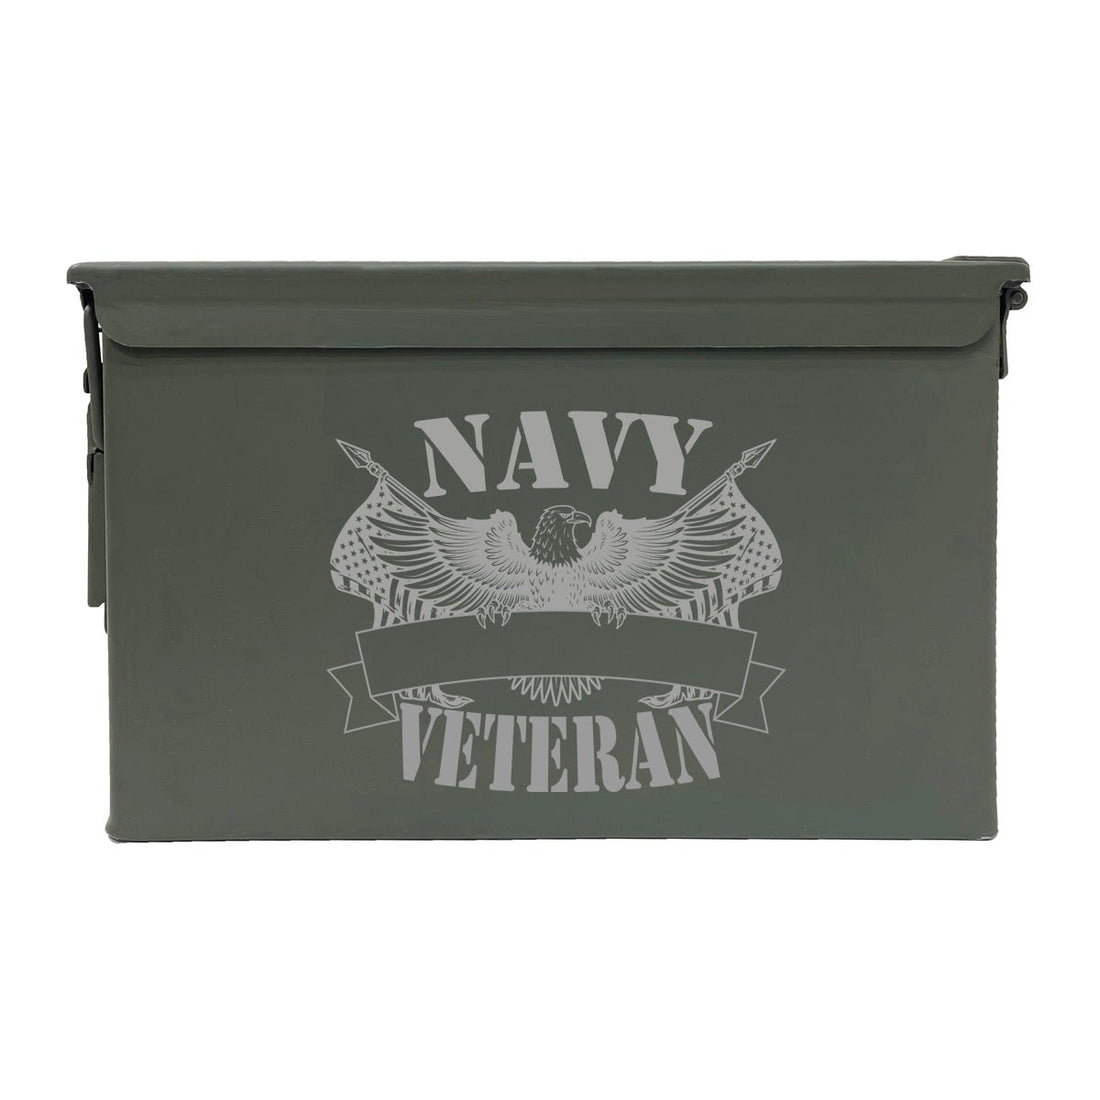 Laser Engraved - NAVY - Veteran Used Grade 1 Ammo Cans - 30 Cal, 50 Cal or Fat 50 - ATOM Promotions